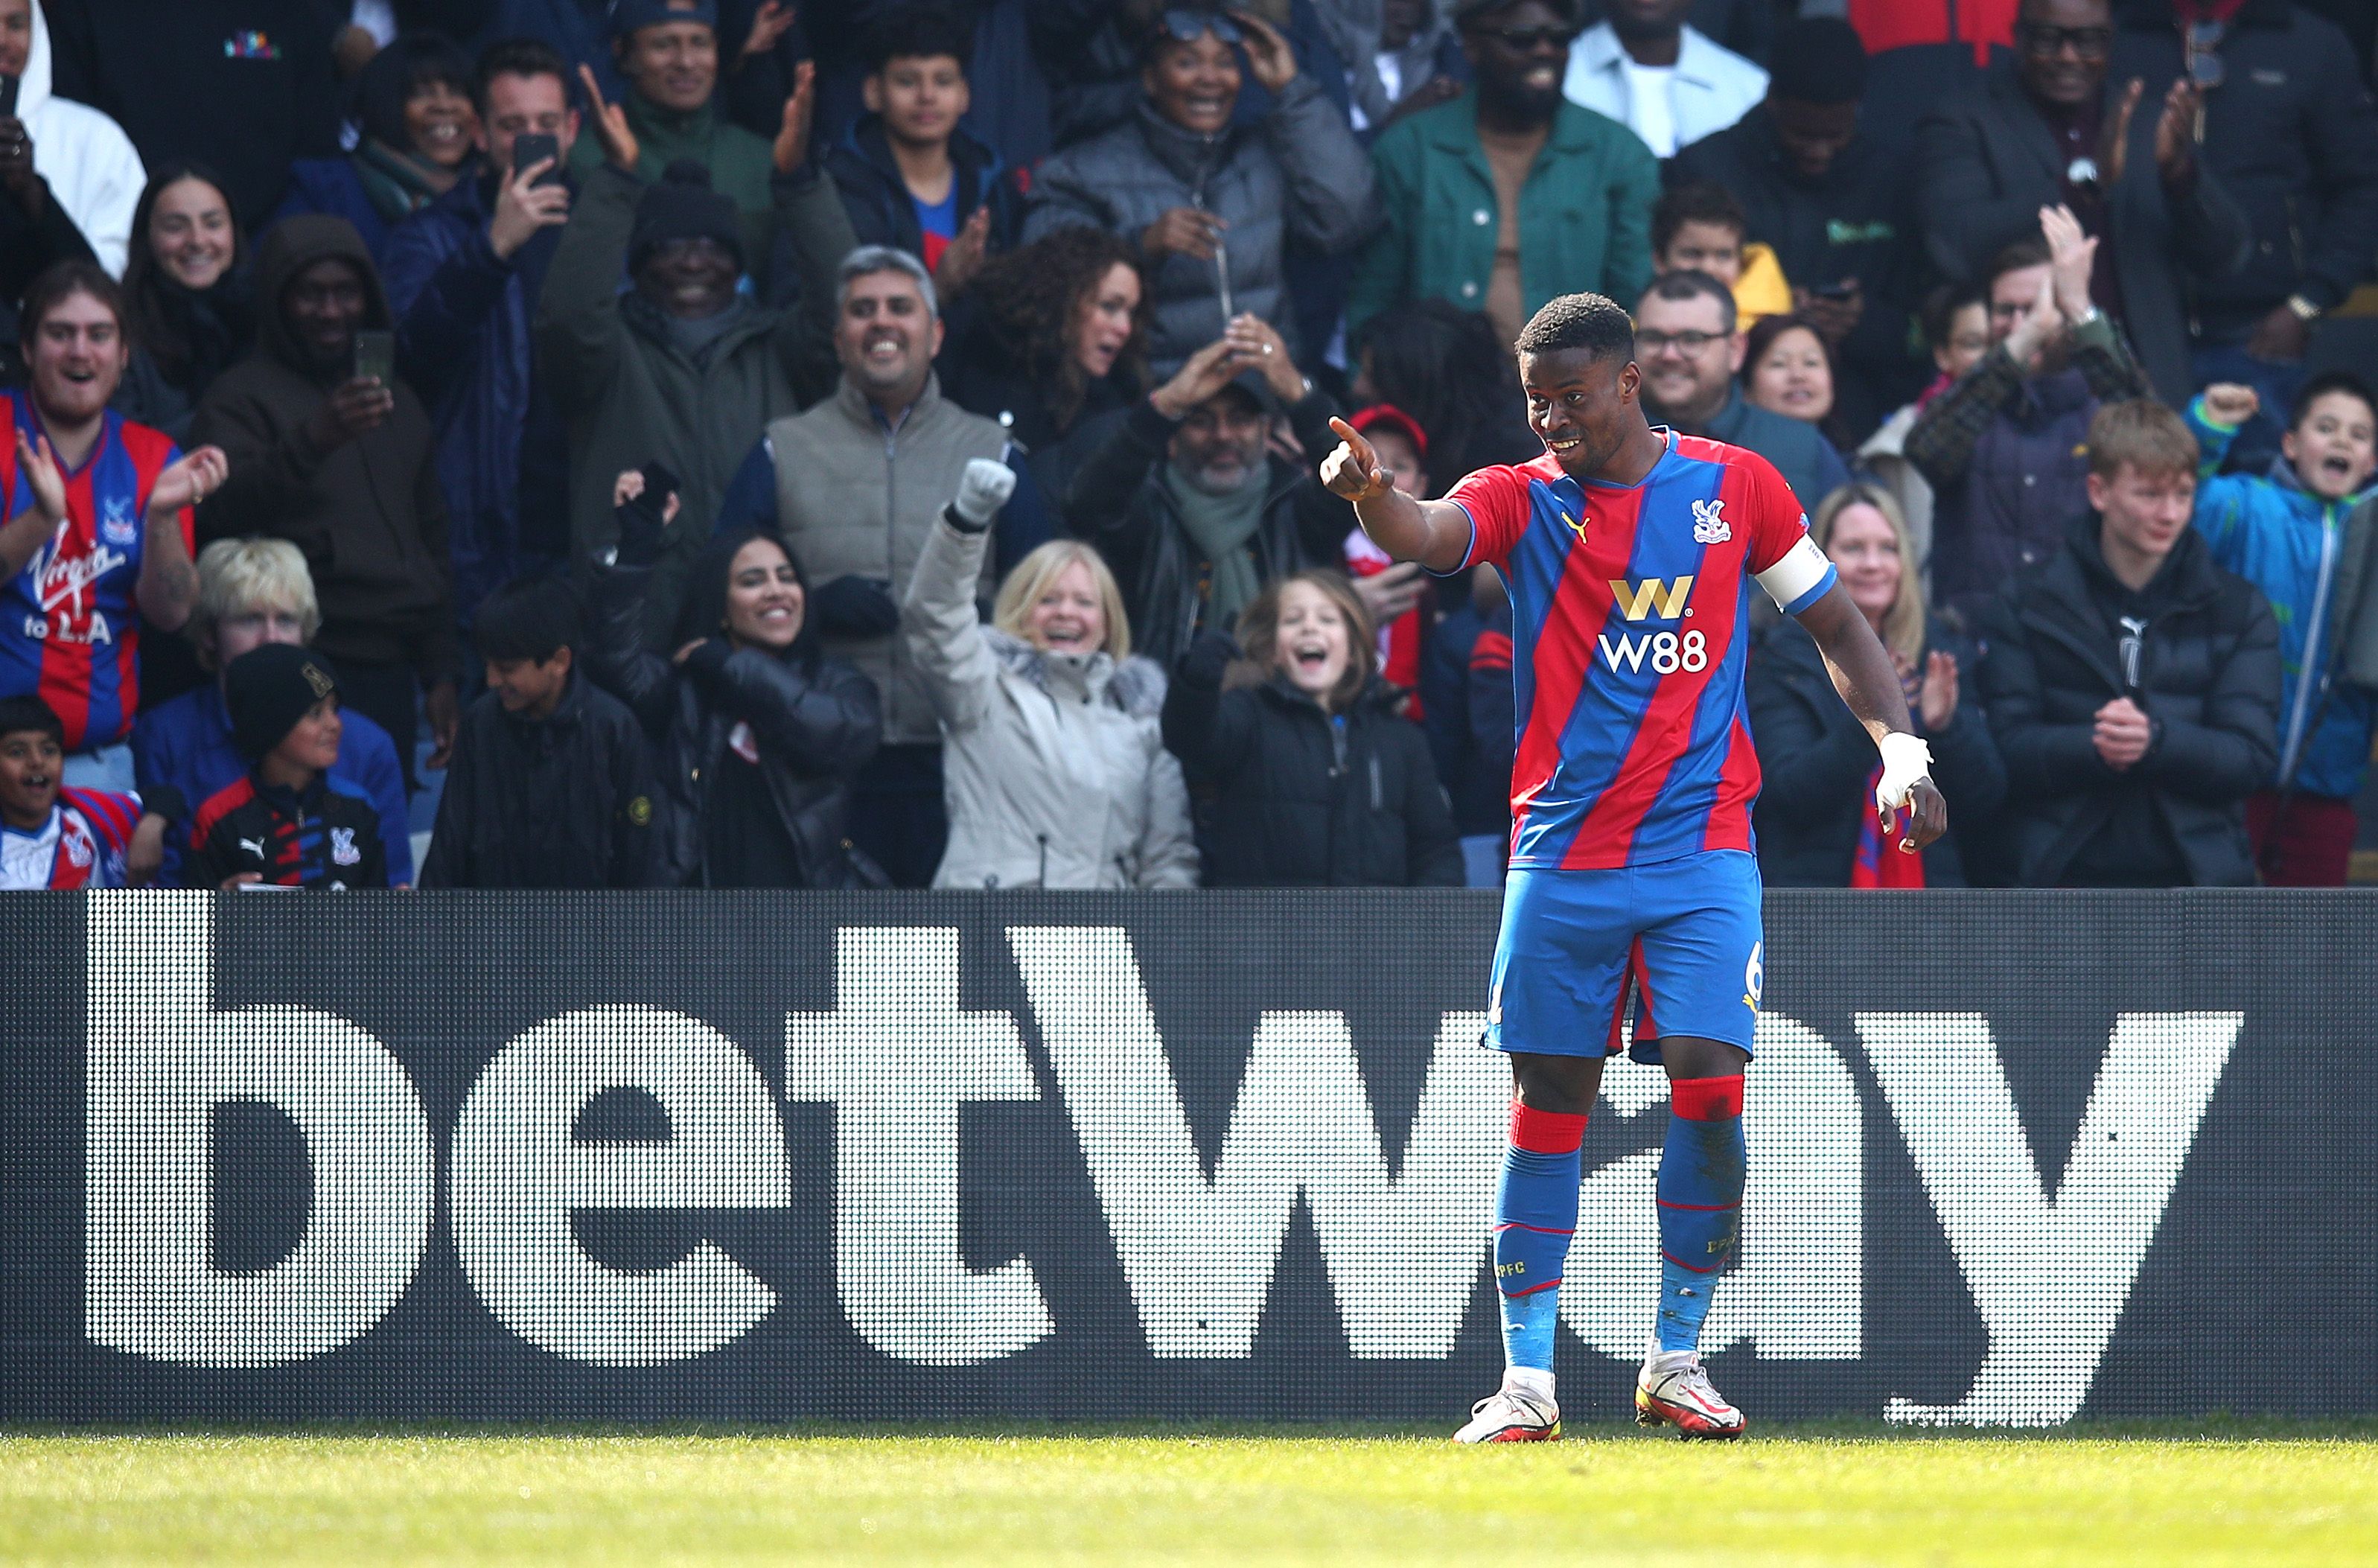  Marc Guehi of Crystal Palace celebrates after scoring their side's first goal during the Emirates FA Cup Quarter Final match between Crystal Palace and Everton at Selhurst Park on March 20, 2022 in London, England.